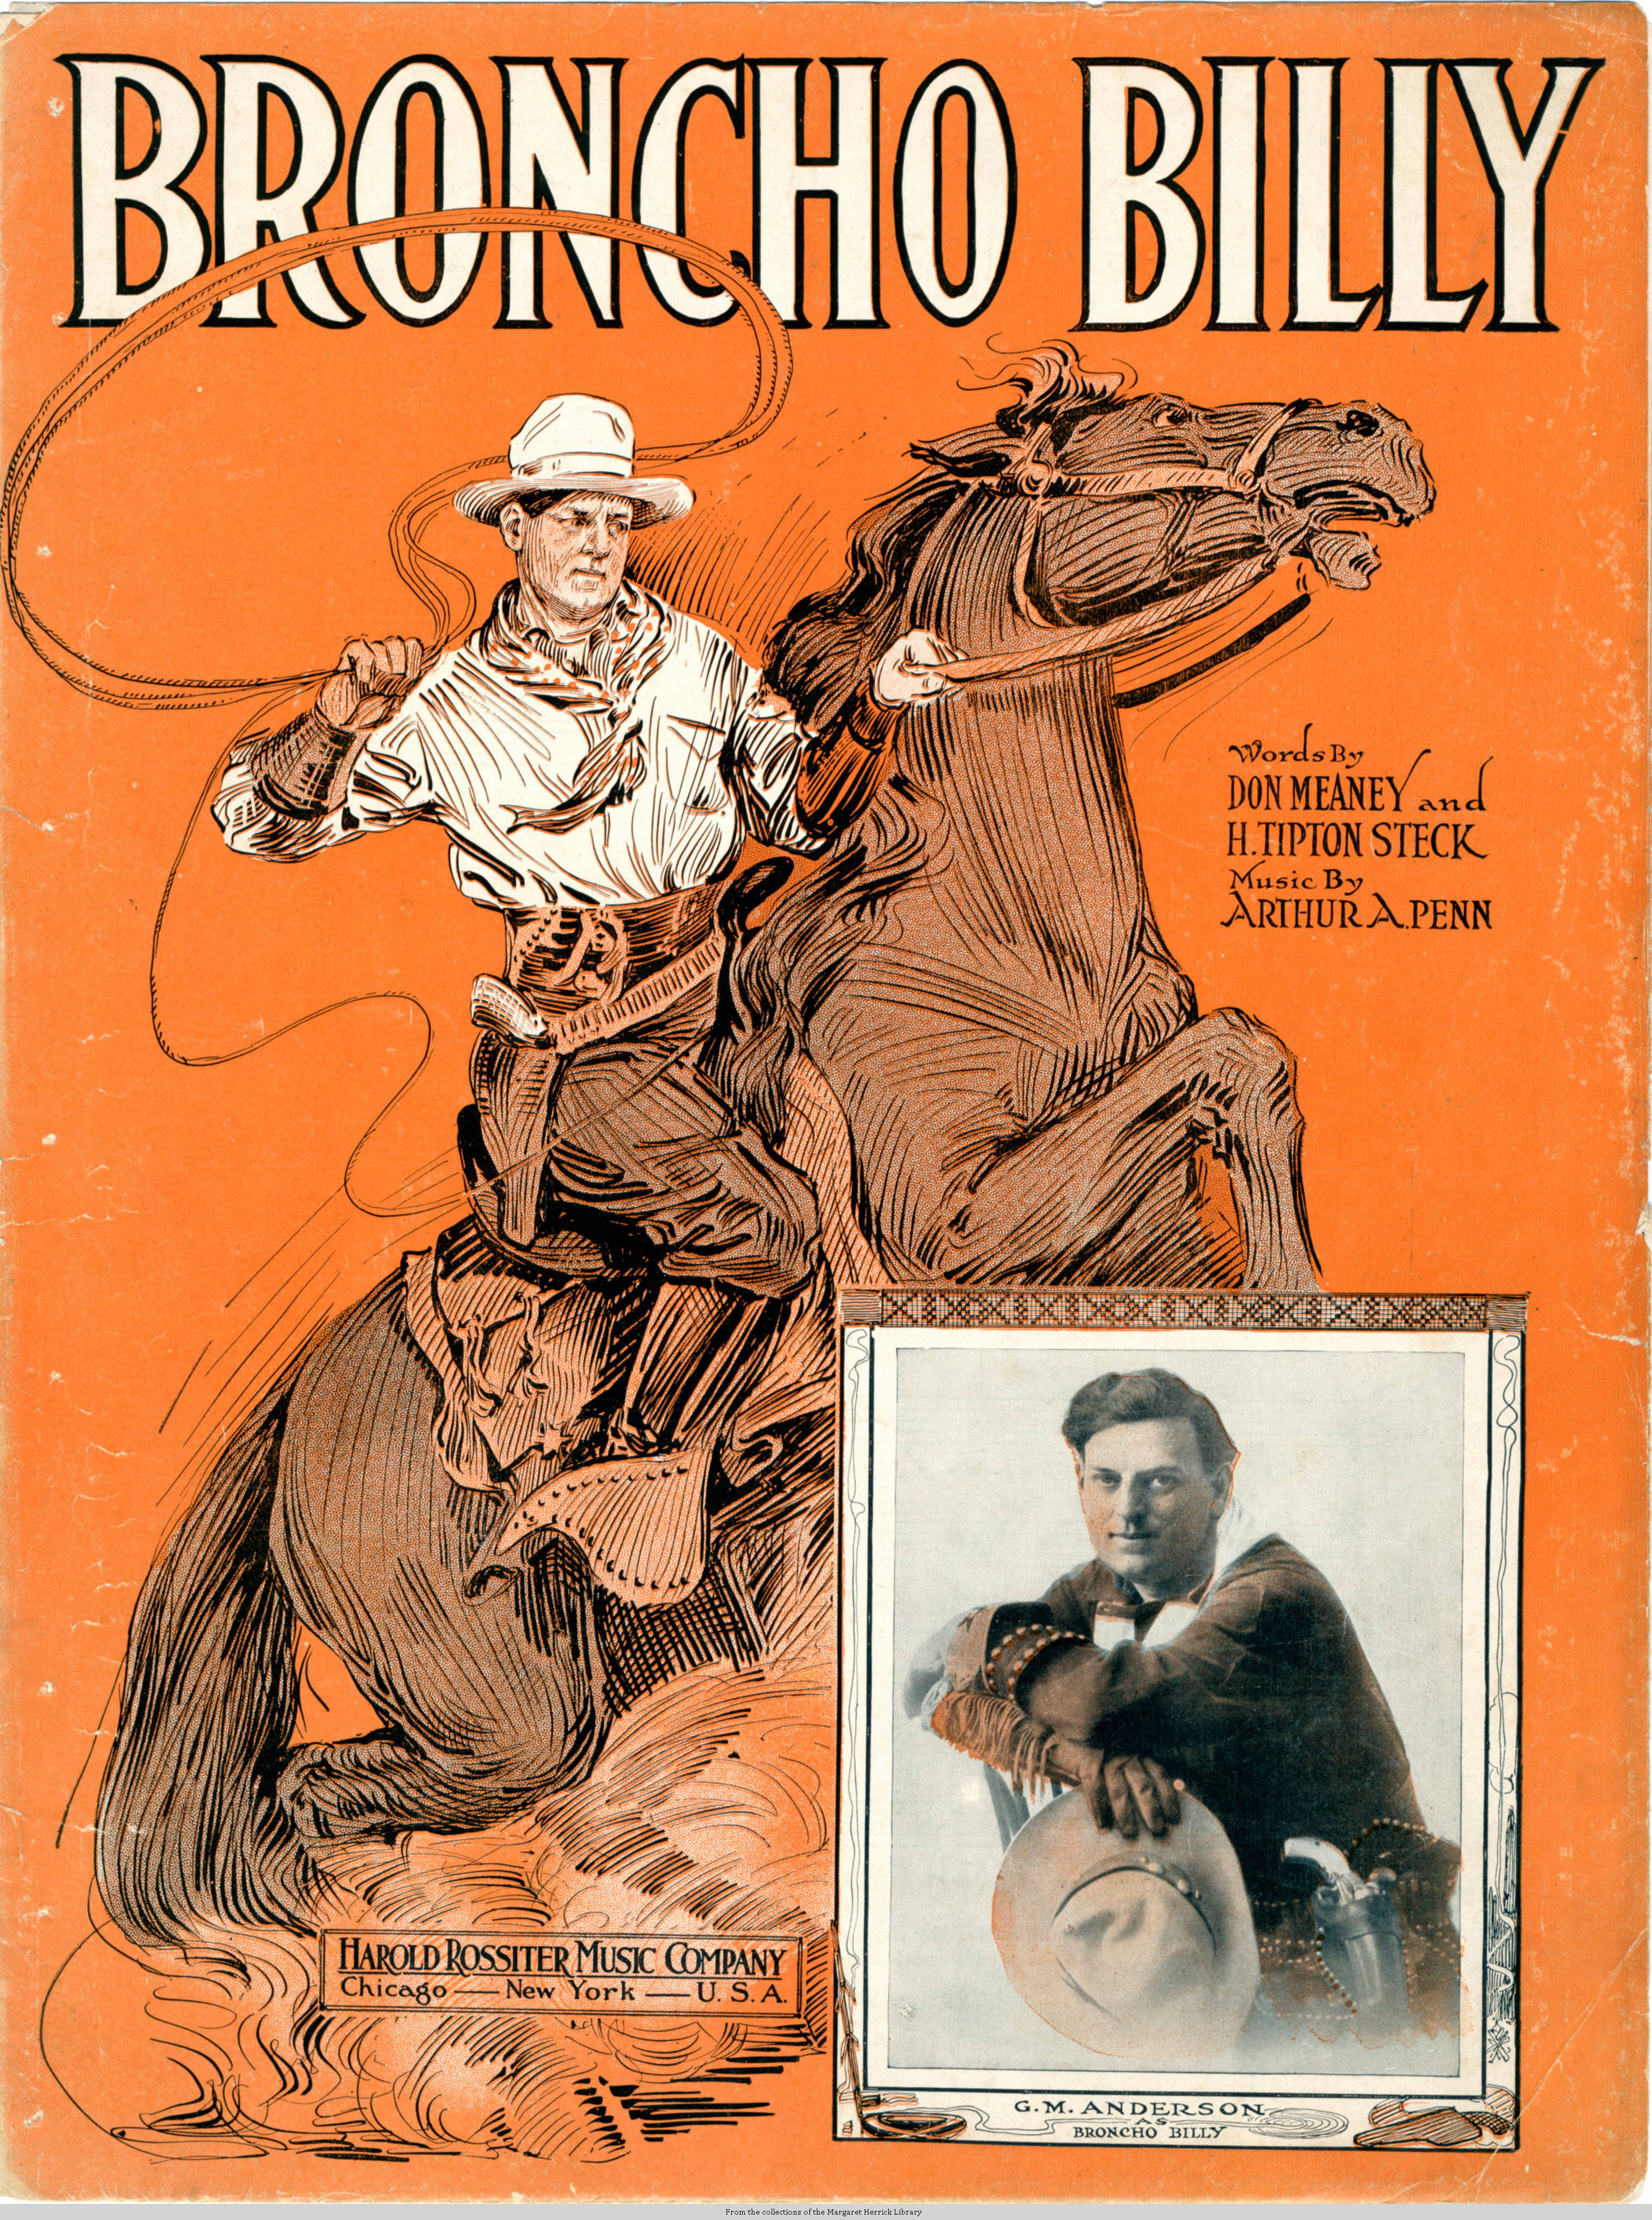 Sheet music cover - BRONCHO BILLY (1914)